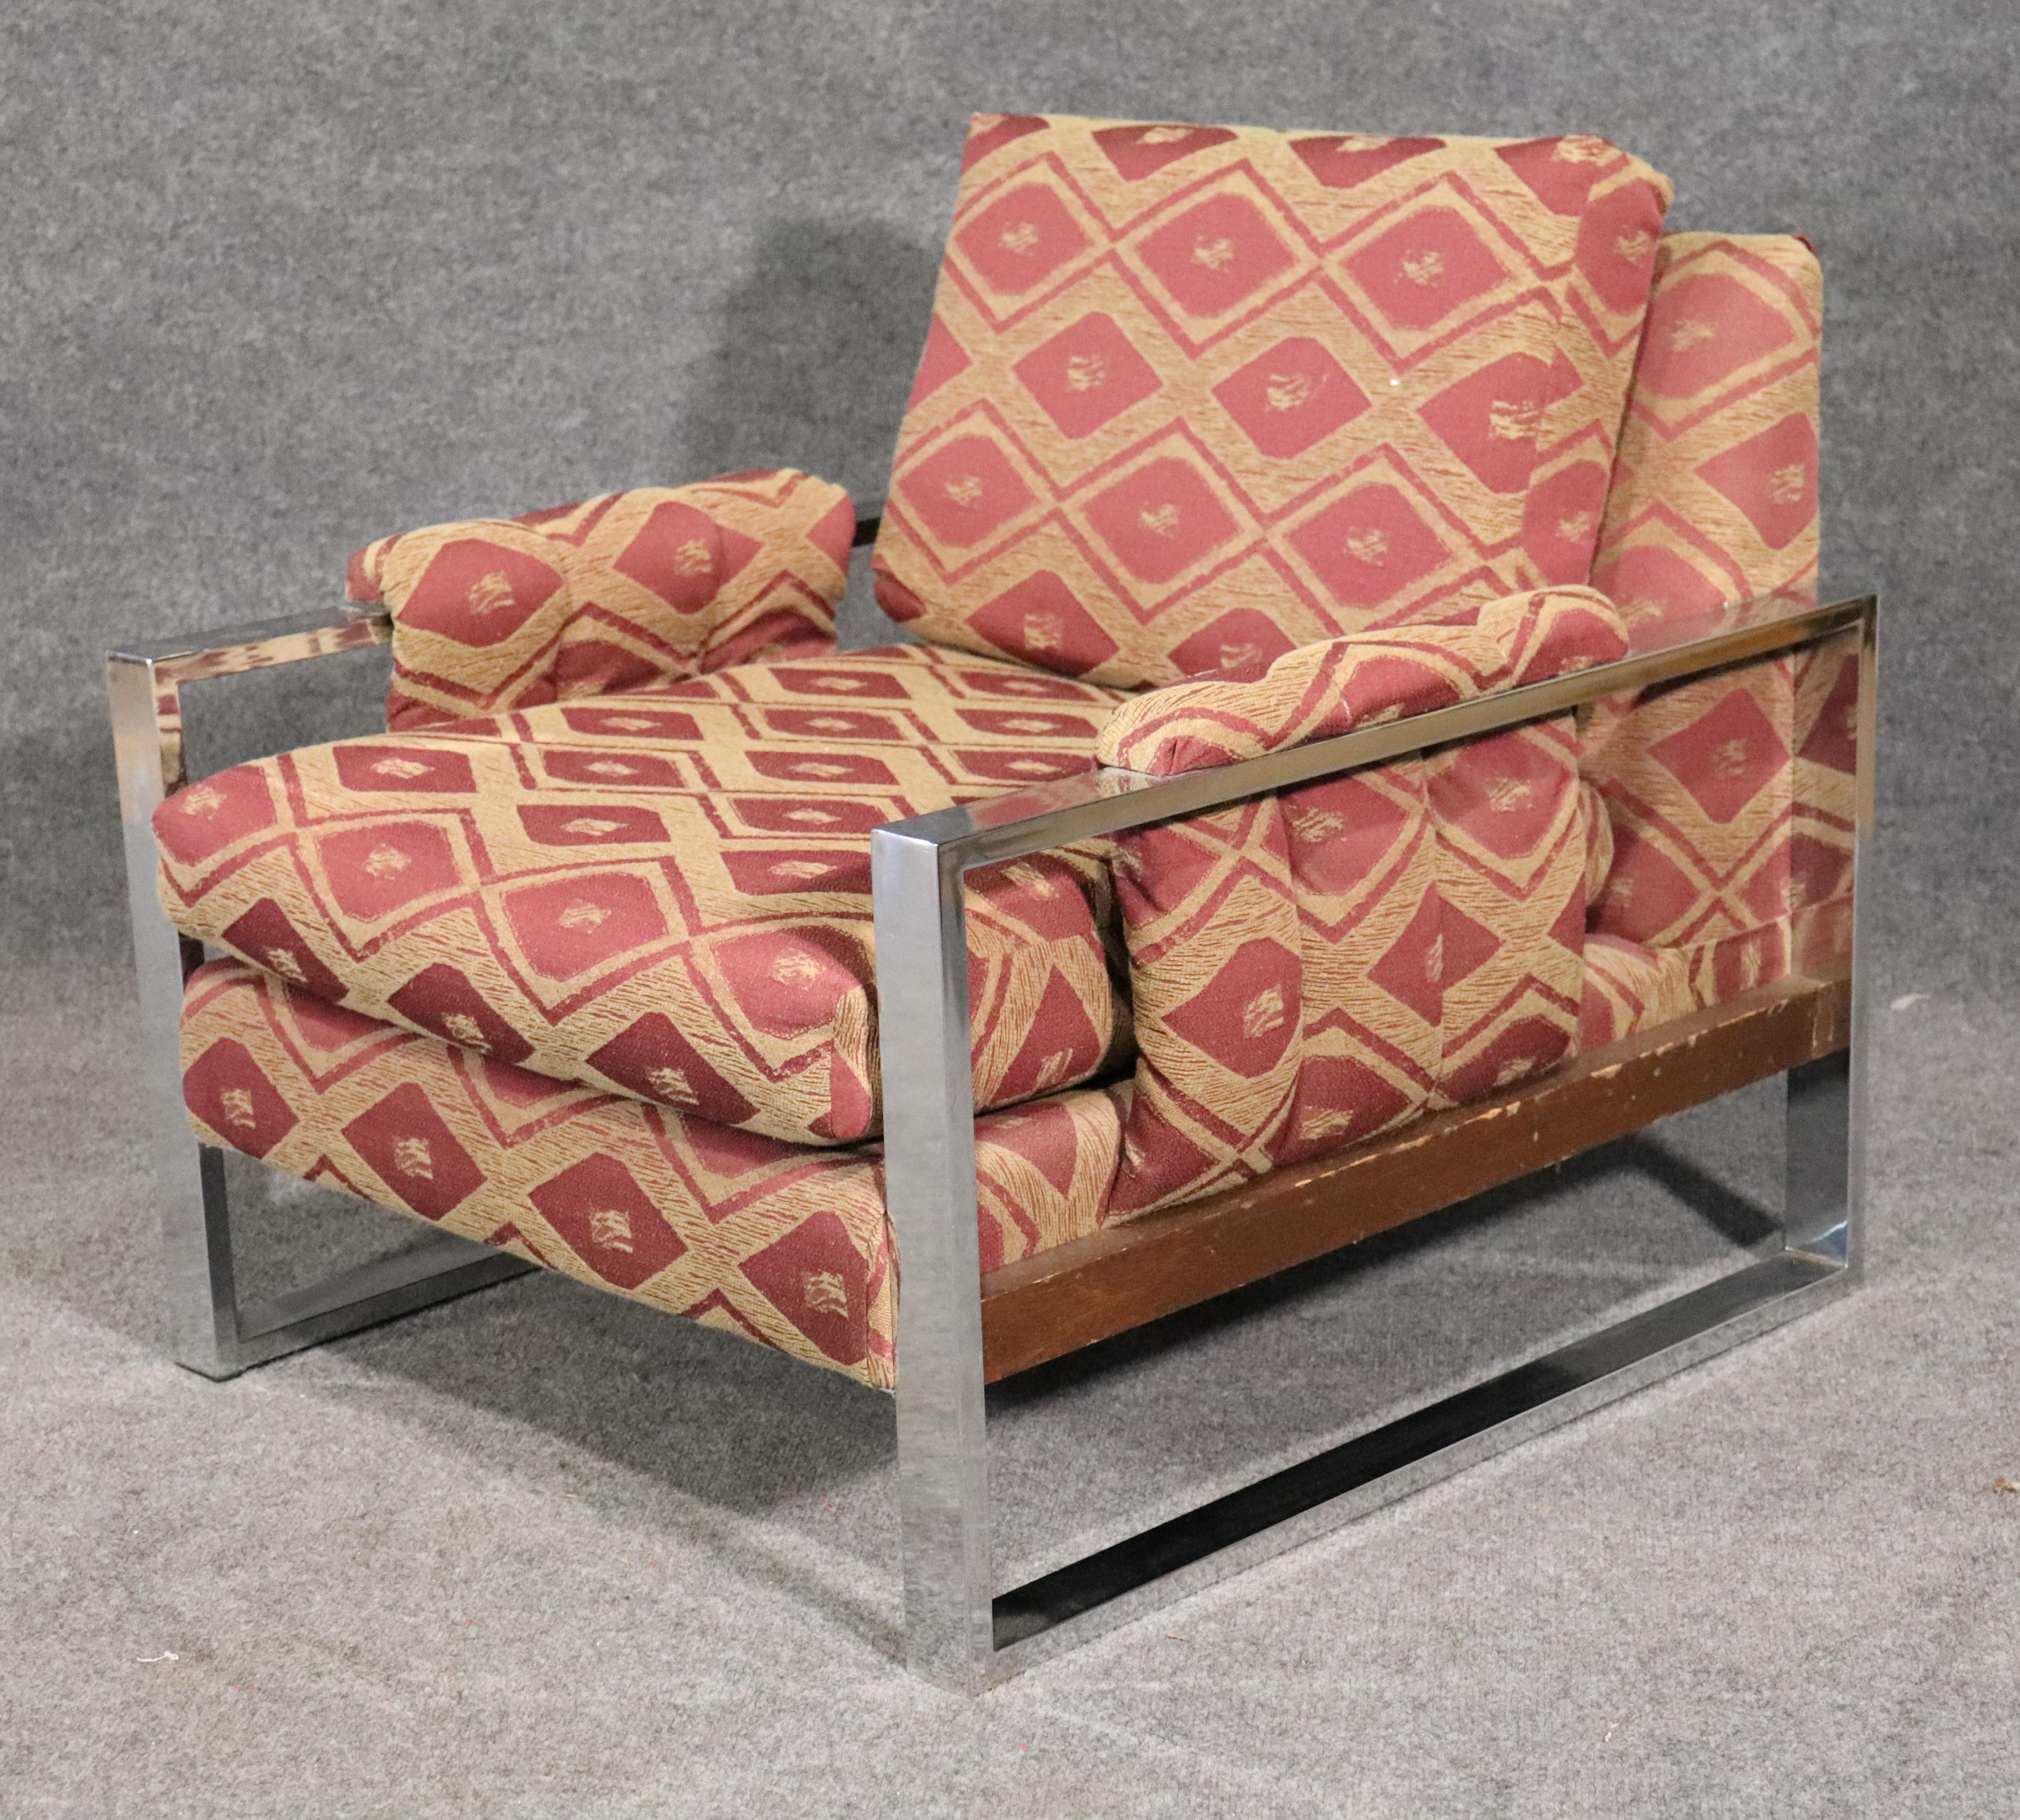 Mid-Century Modern flat bar arm chair in the style of Milo Baughman with matching footstool. Great design for modern home or office.
Please confirm location.